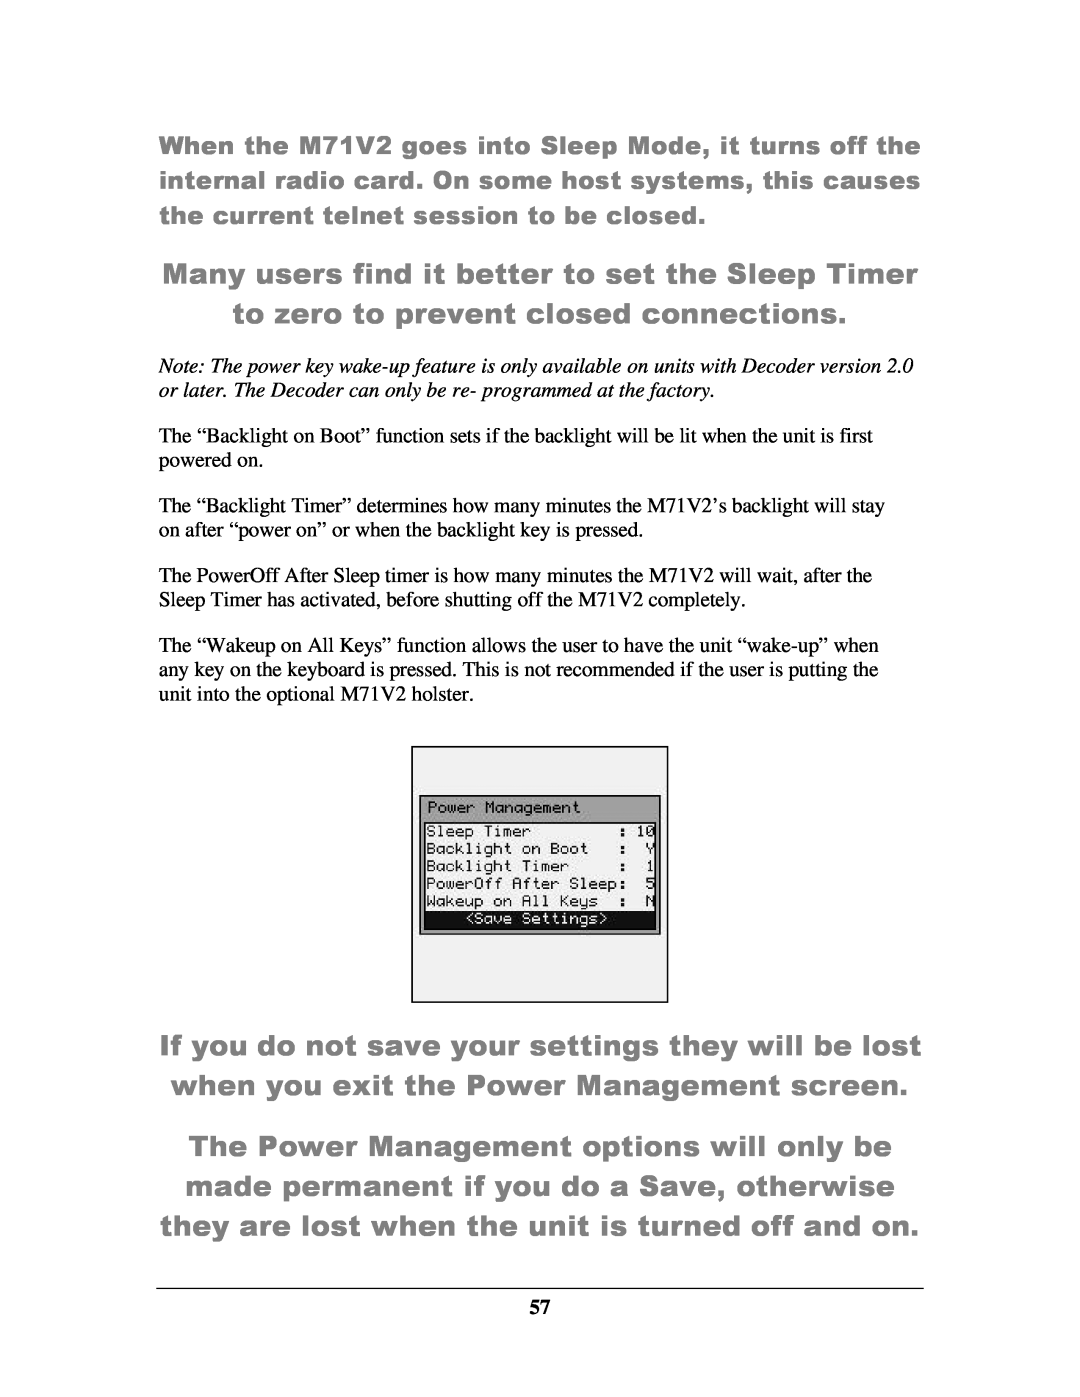 IBM M71V2 manual Many users find it better to set the Sleep Timer, to zero to prevent closed connections 